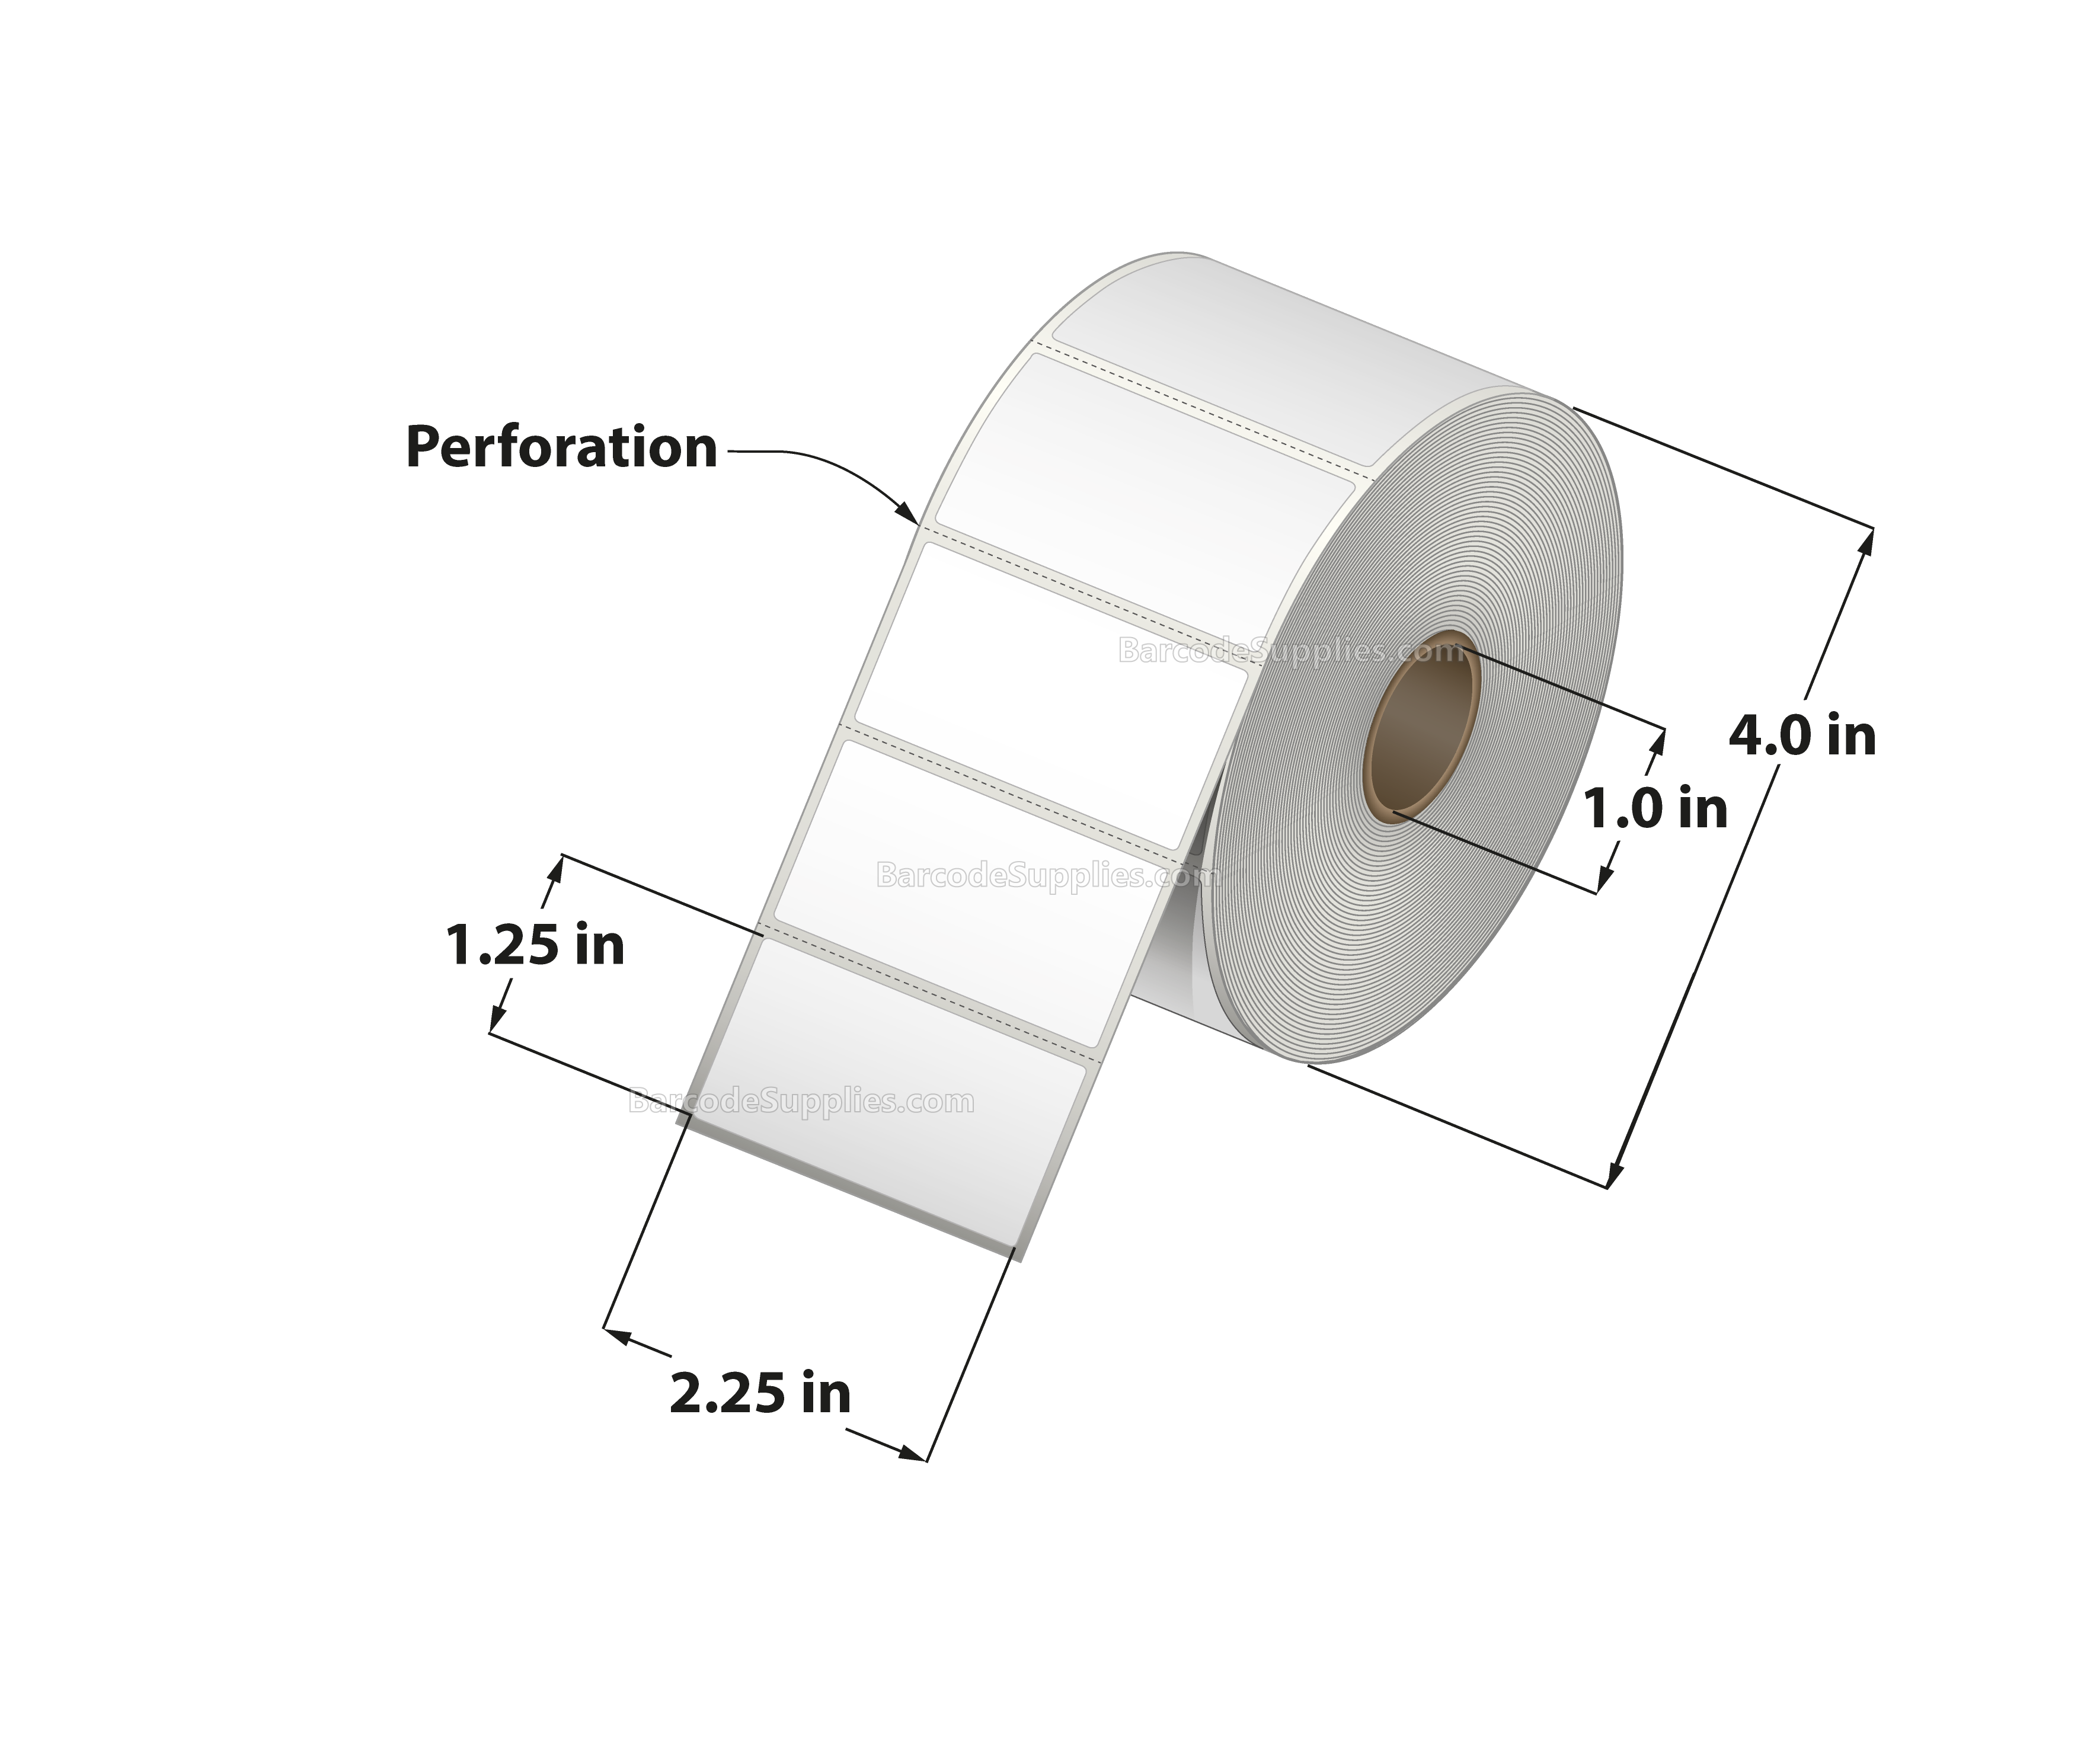 2.25 x 1.25 Direct Thermal White Labels With Acrylic Adhesive - Perforated - 1135 Labels Per Roll - Carton Of 12 Rolls - 13620 Labels Total - MPN: RD-225-125-1135-1 - BarcodeSource, Inc.